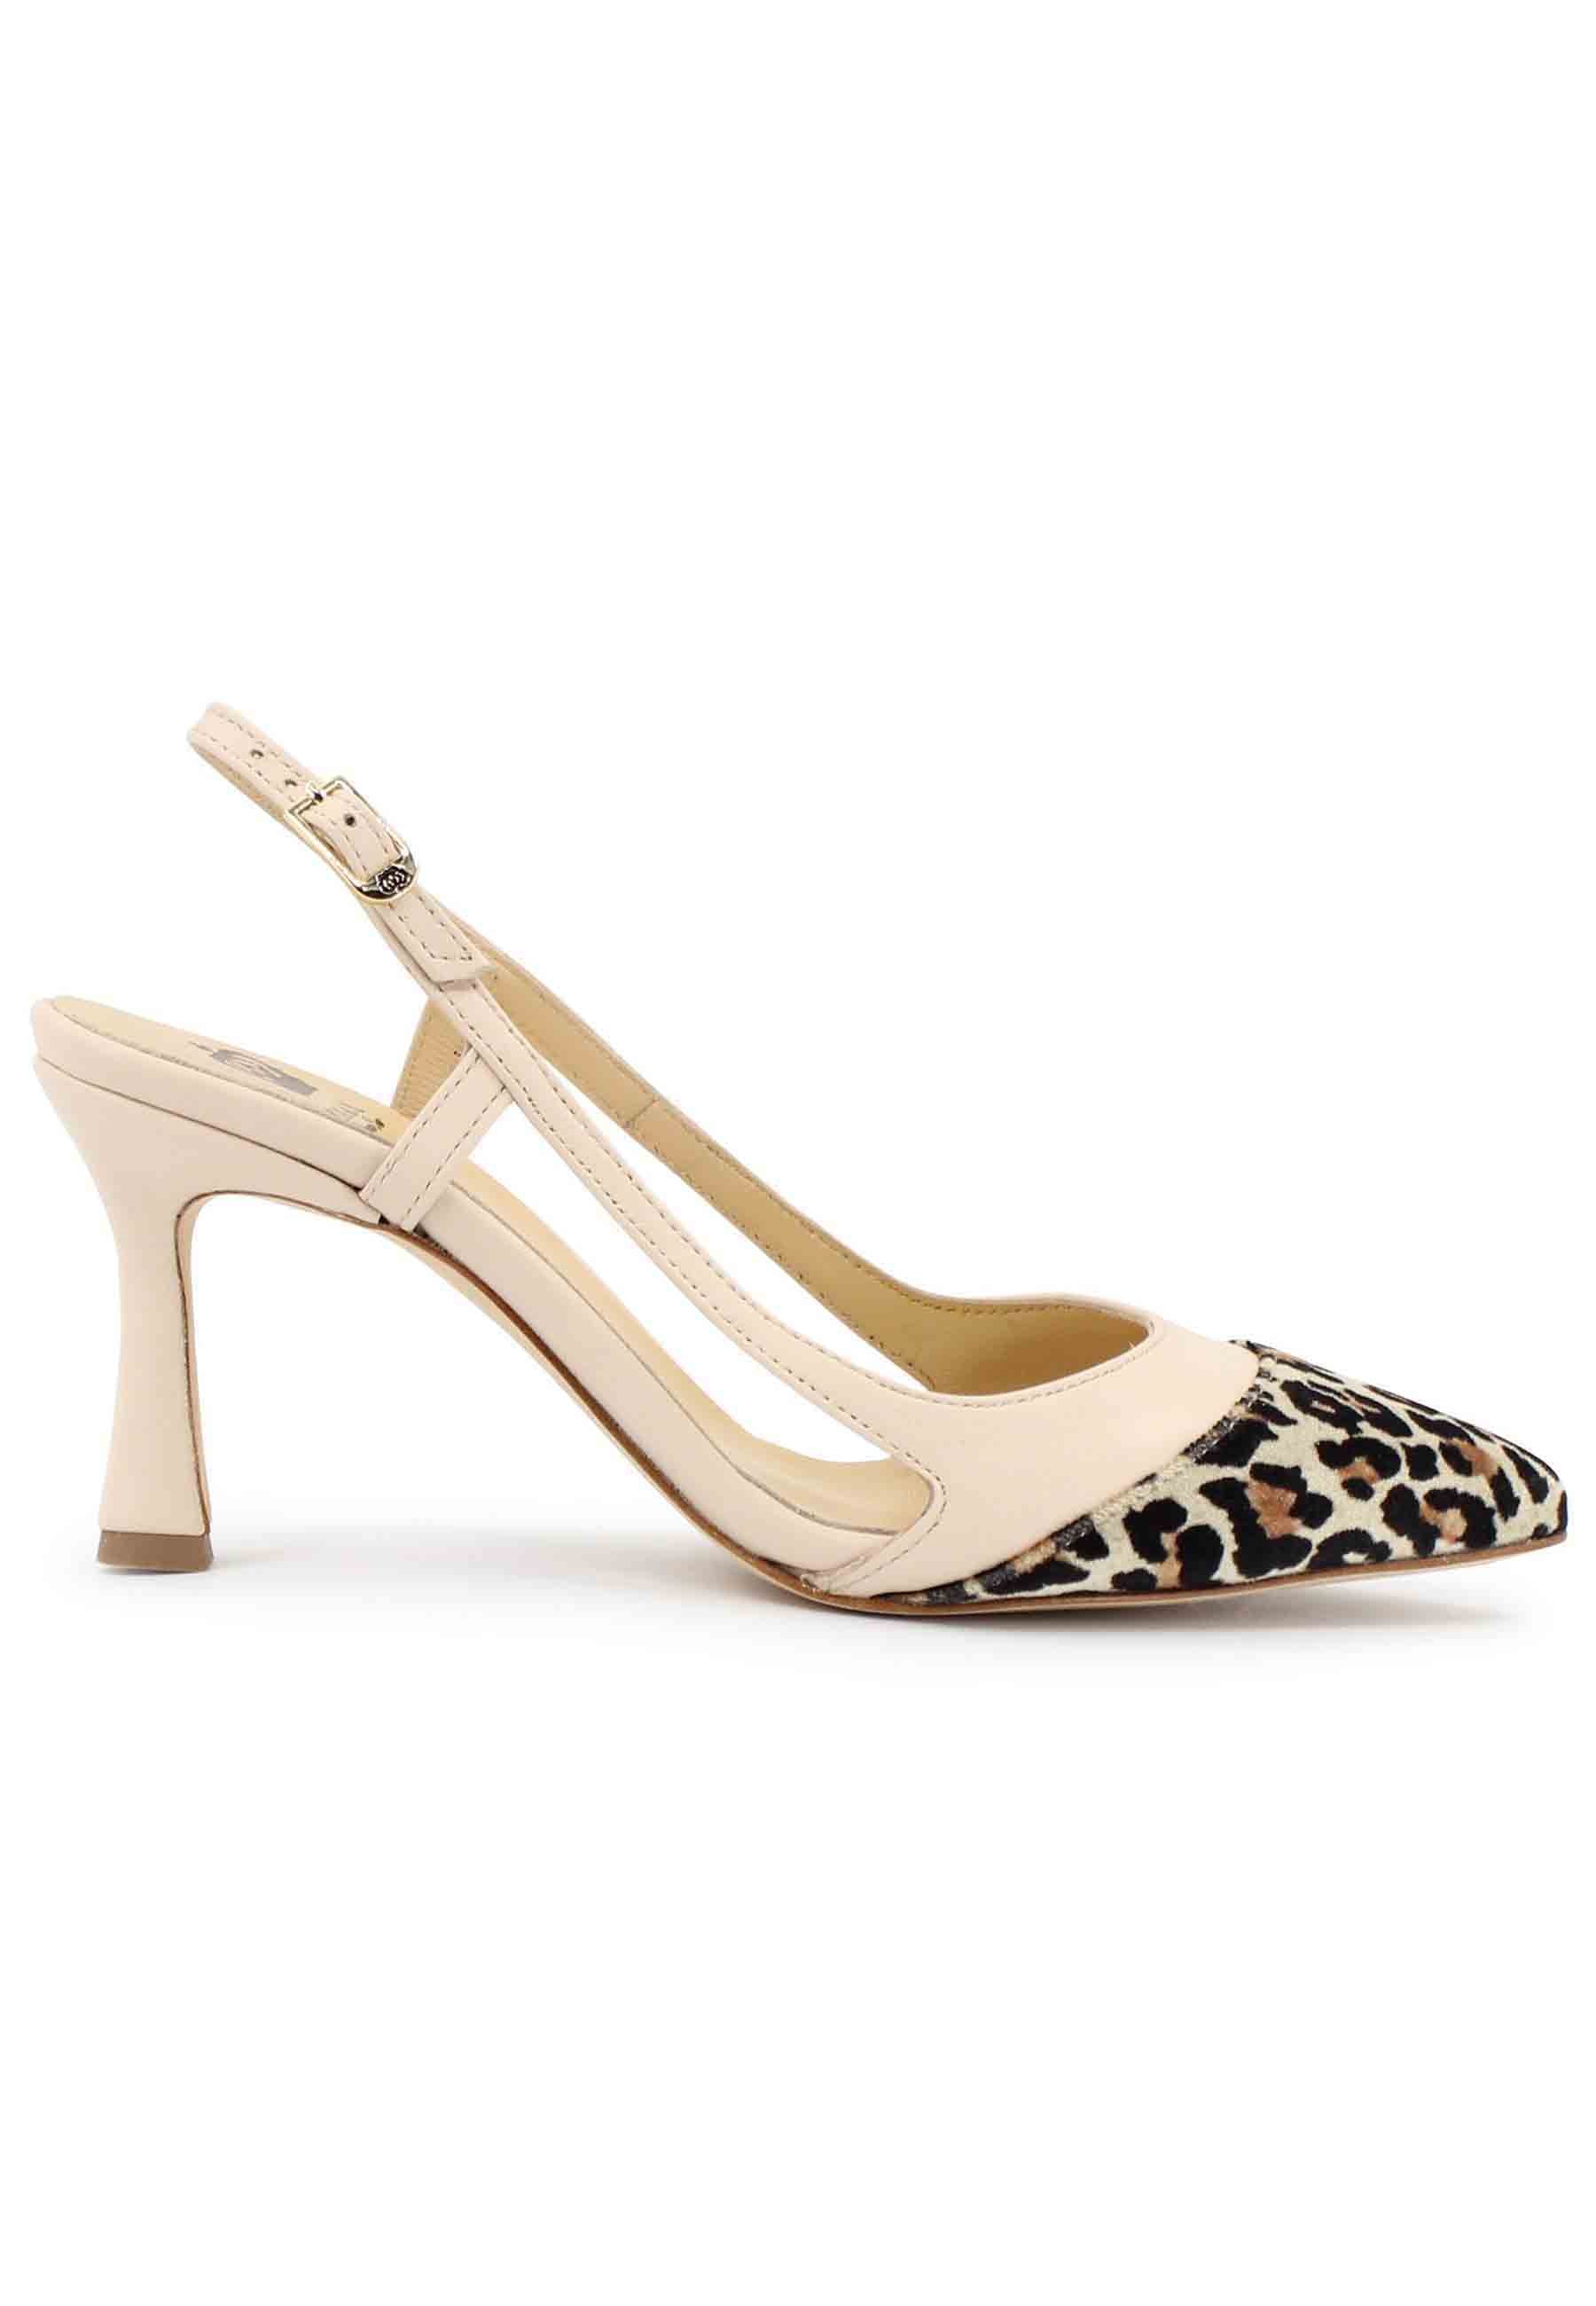 Women's slingback pumps in beige leather and high heel animalier fabric